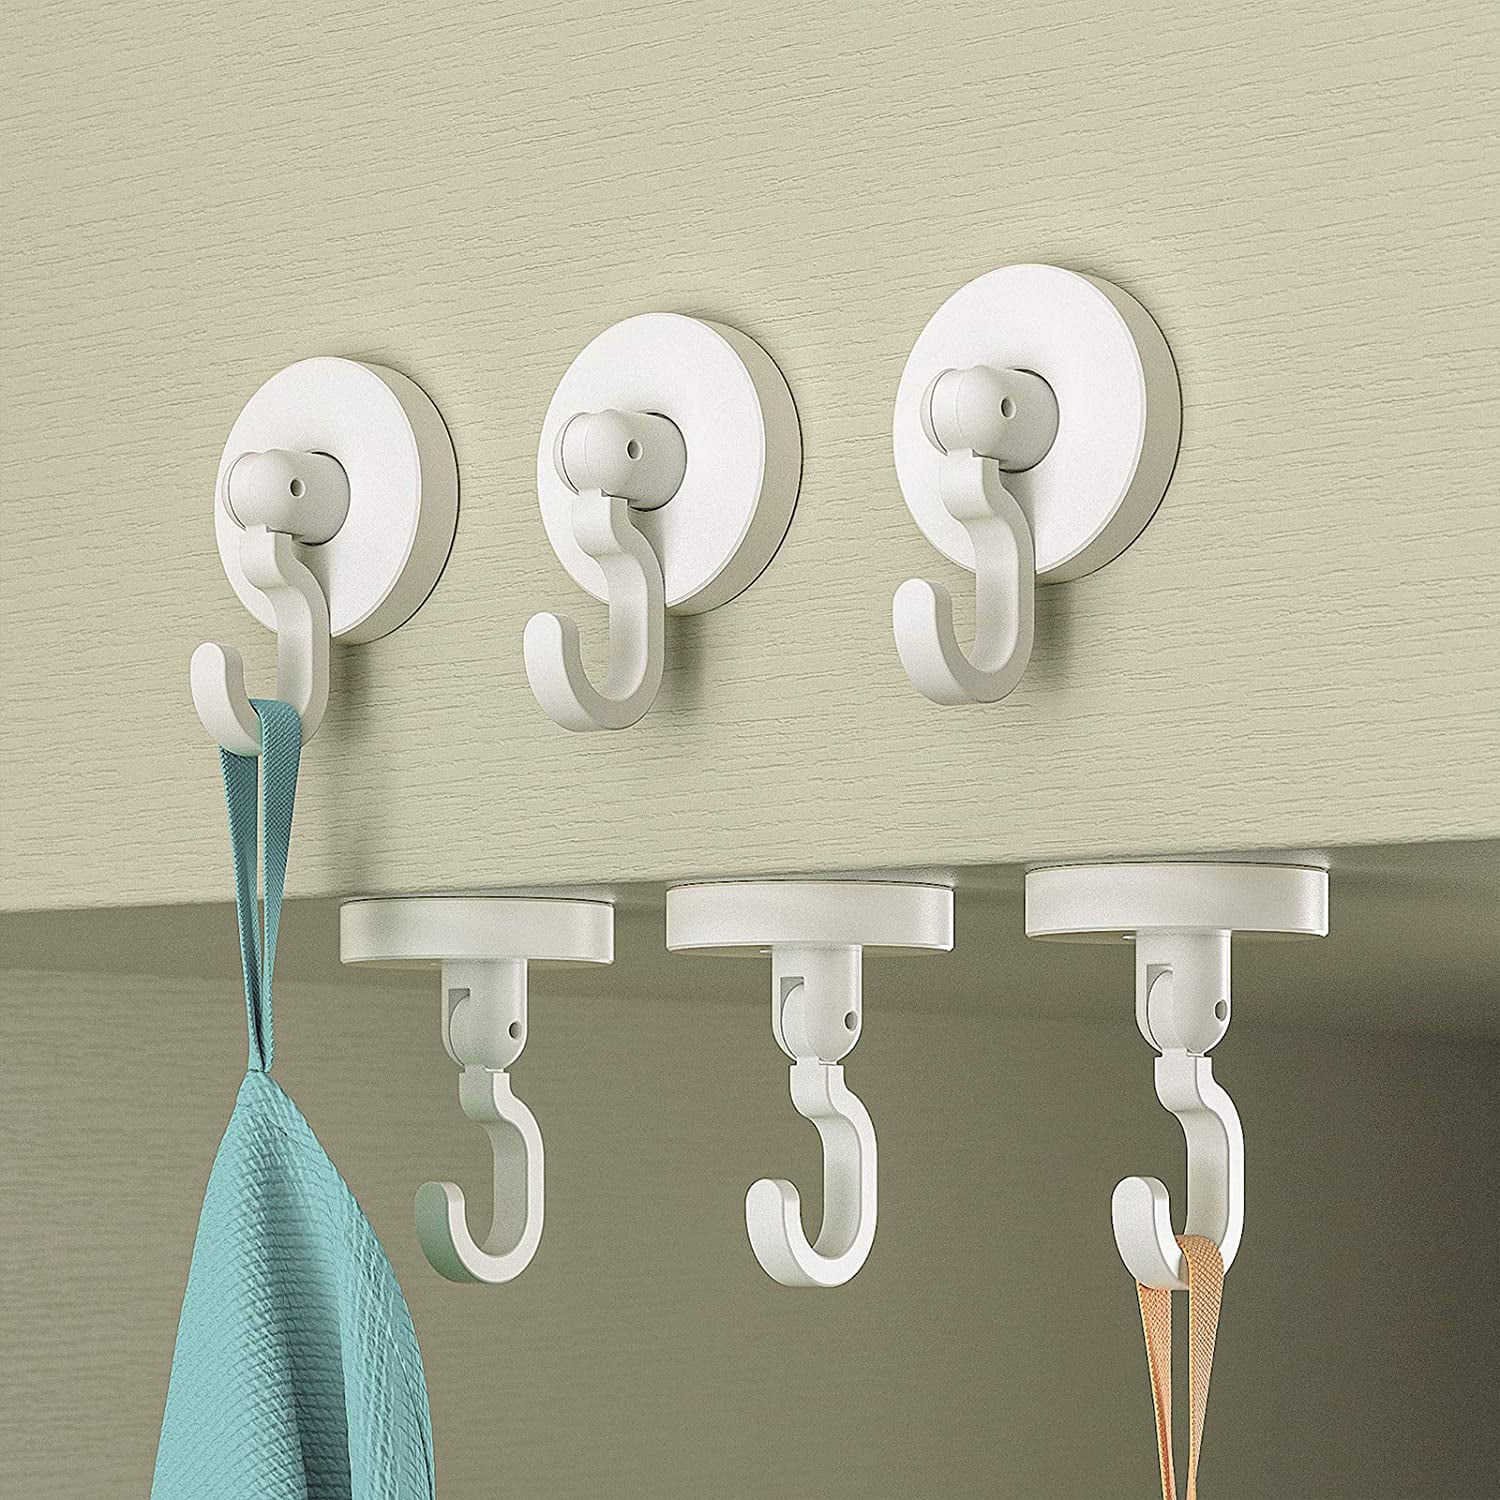 Details about   360° Rotated Kitchen Hooks Self Adhesive 6 Hook Wall Hook Handbag Clothes Hanger